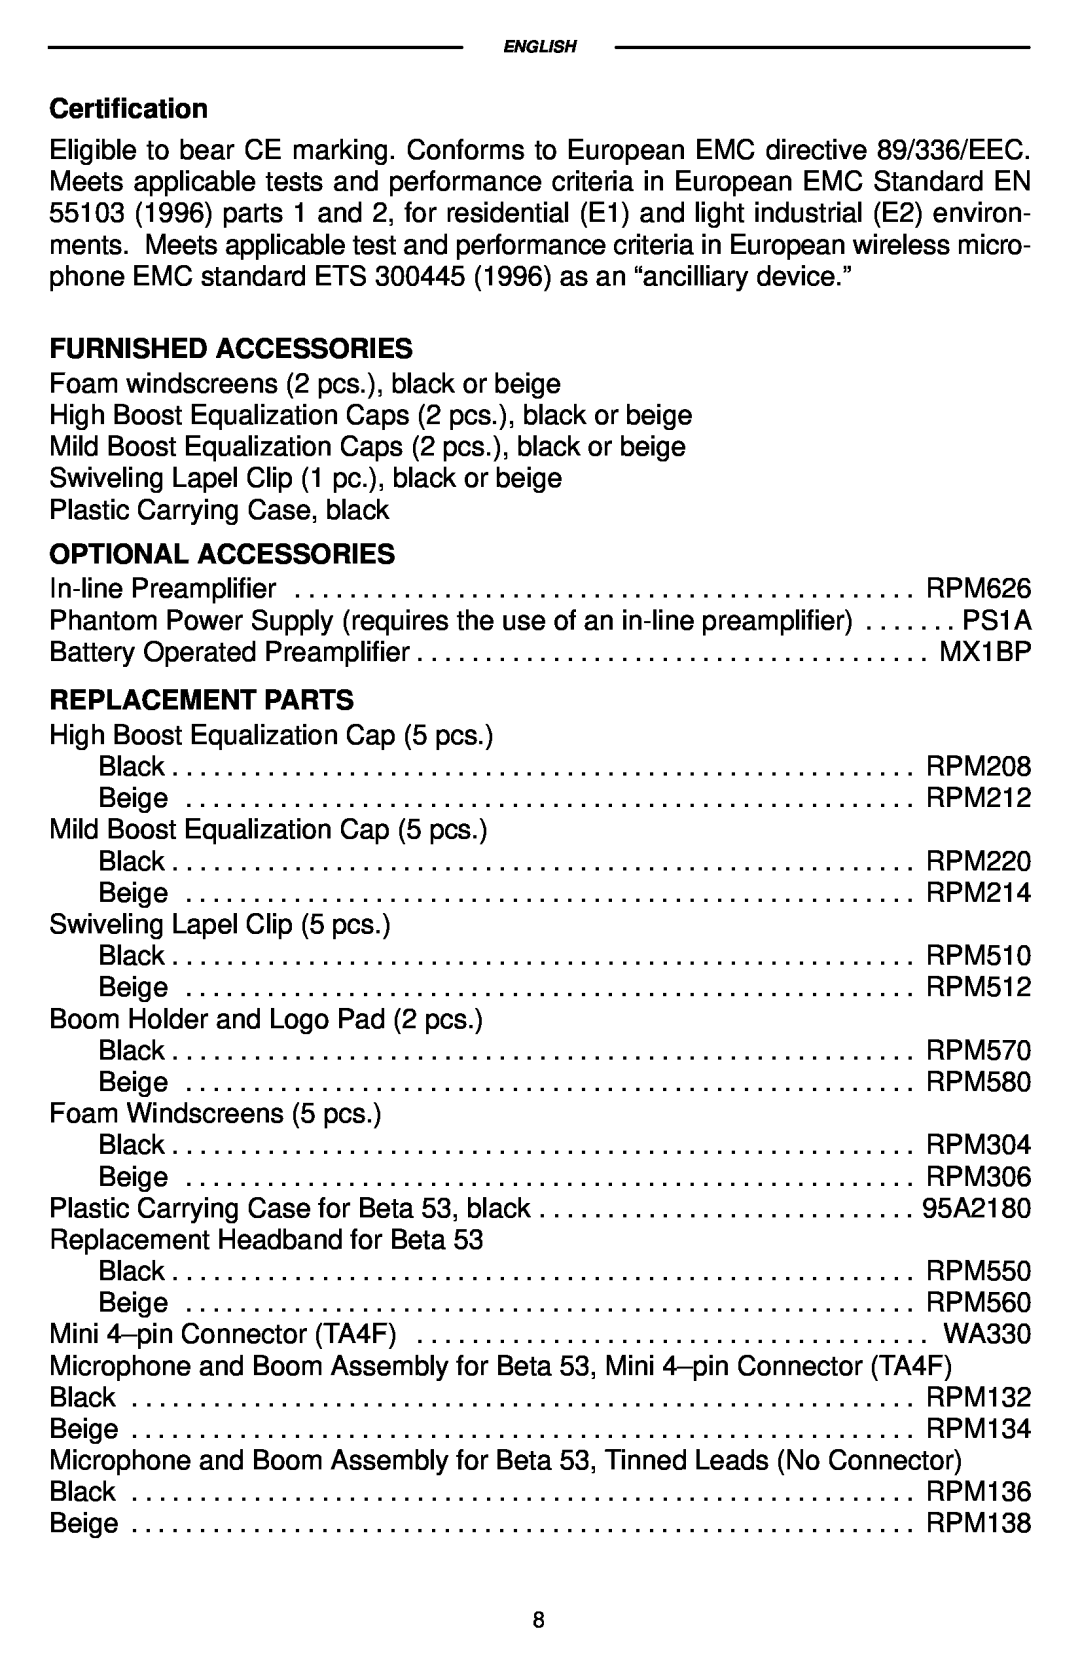 Shure 27C3115 manual Certification, Furnished Accessories, Optional Accessories, Replacement Parts 